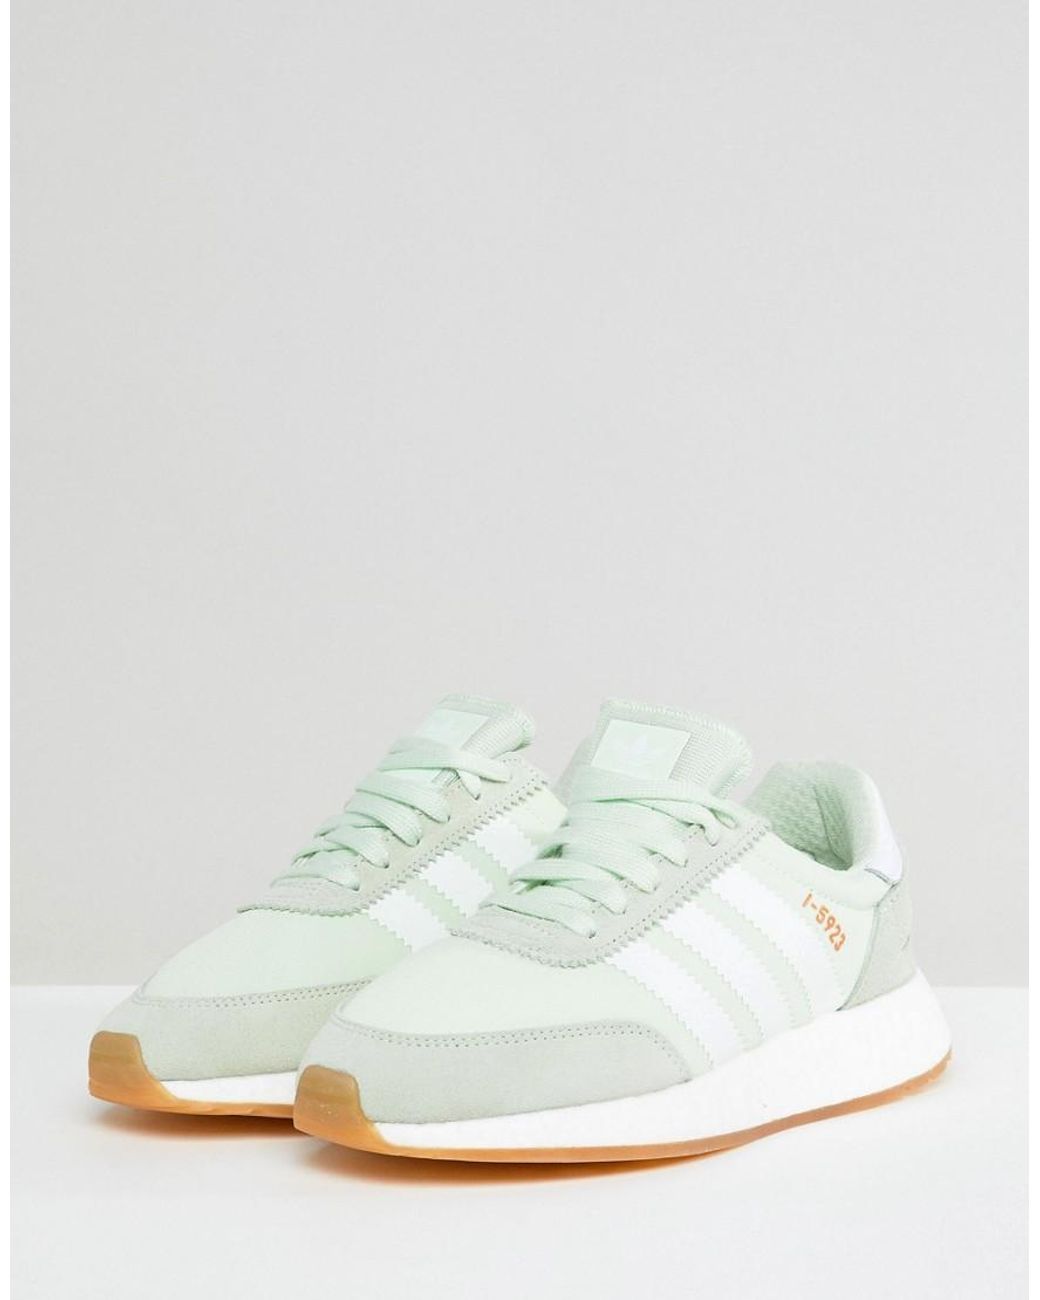 adidas Originals I-5923 Runner Trainers in Green | Lyst